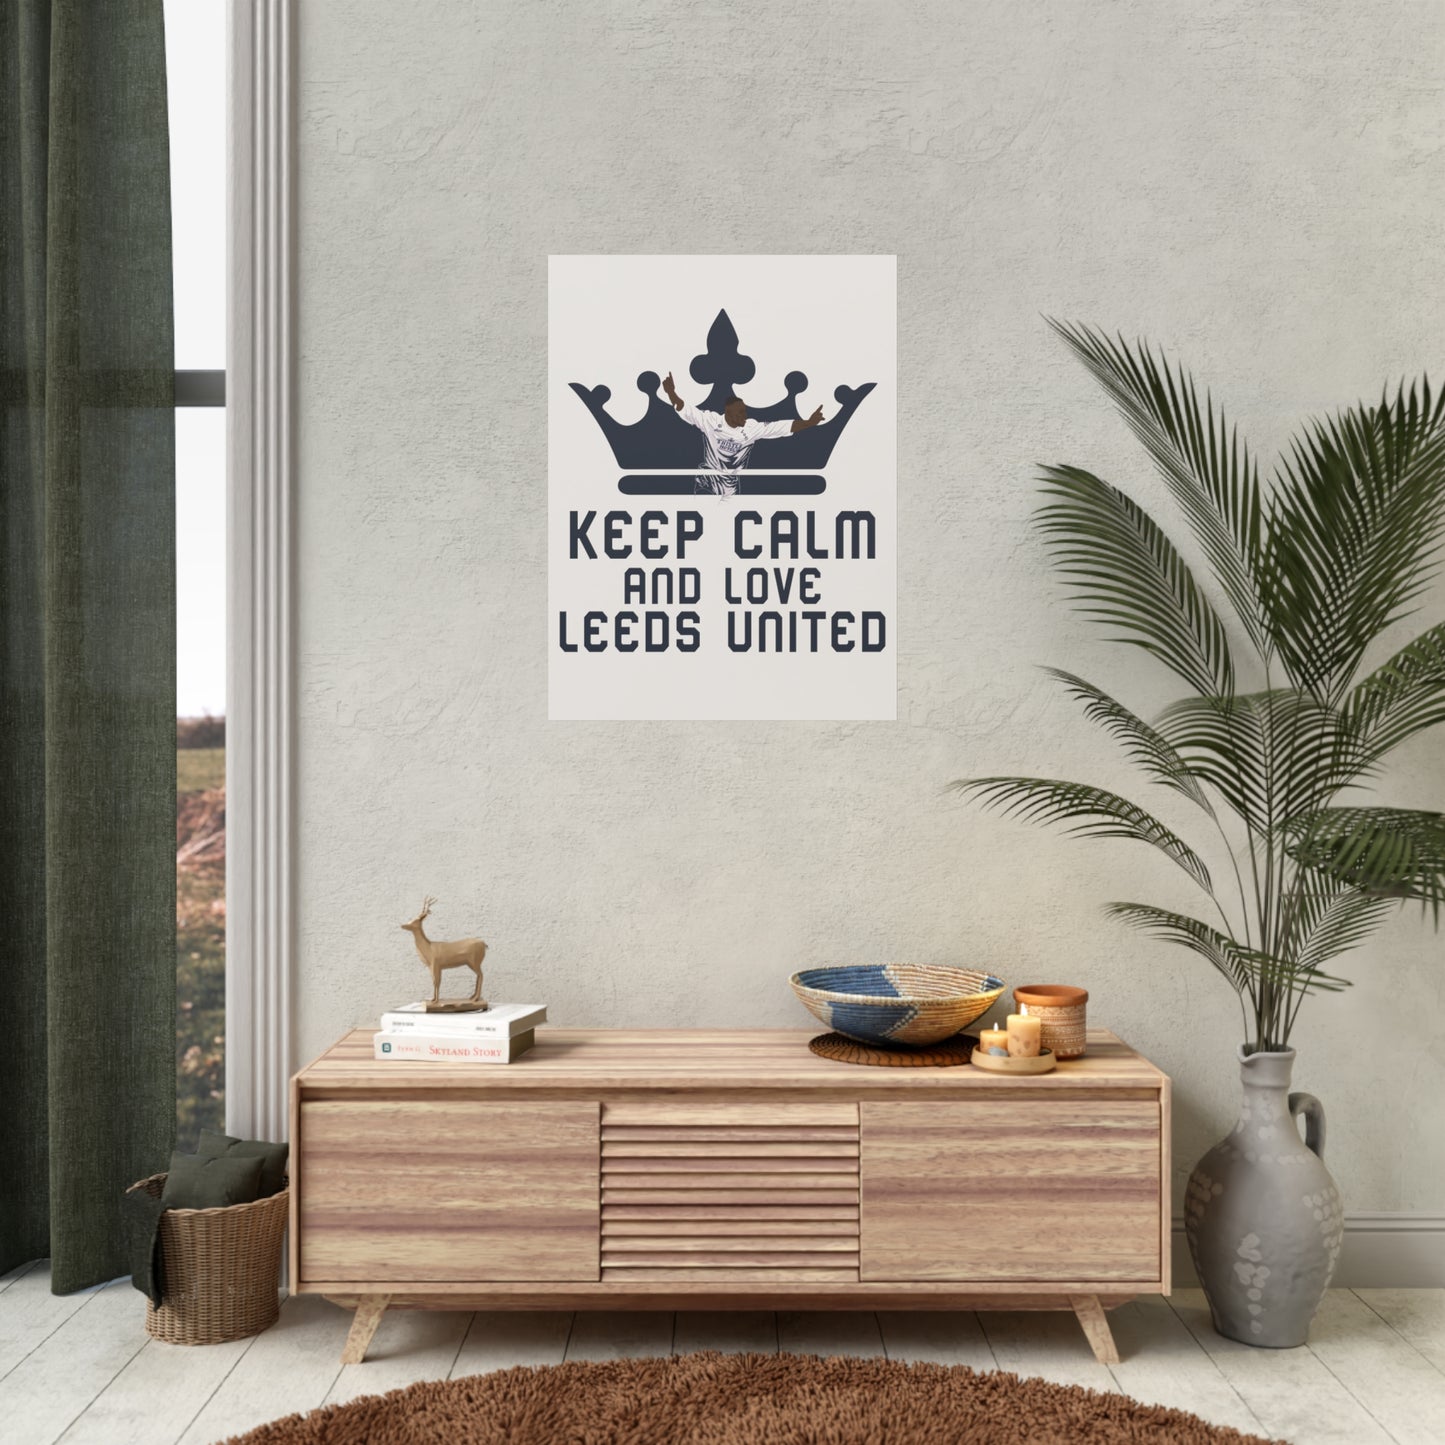 Póster "Keep Calm And Love Leeds United"